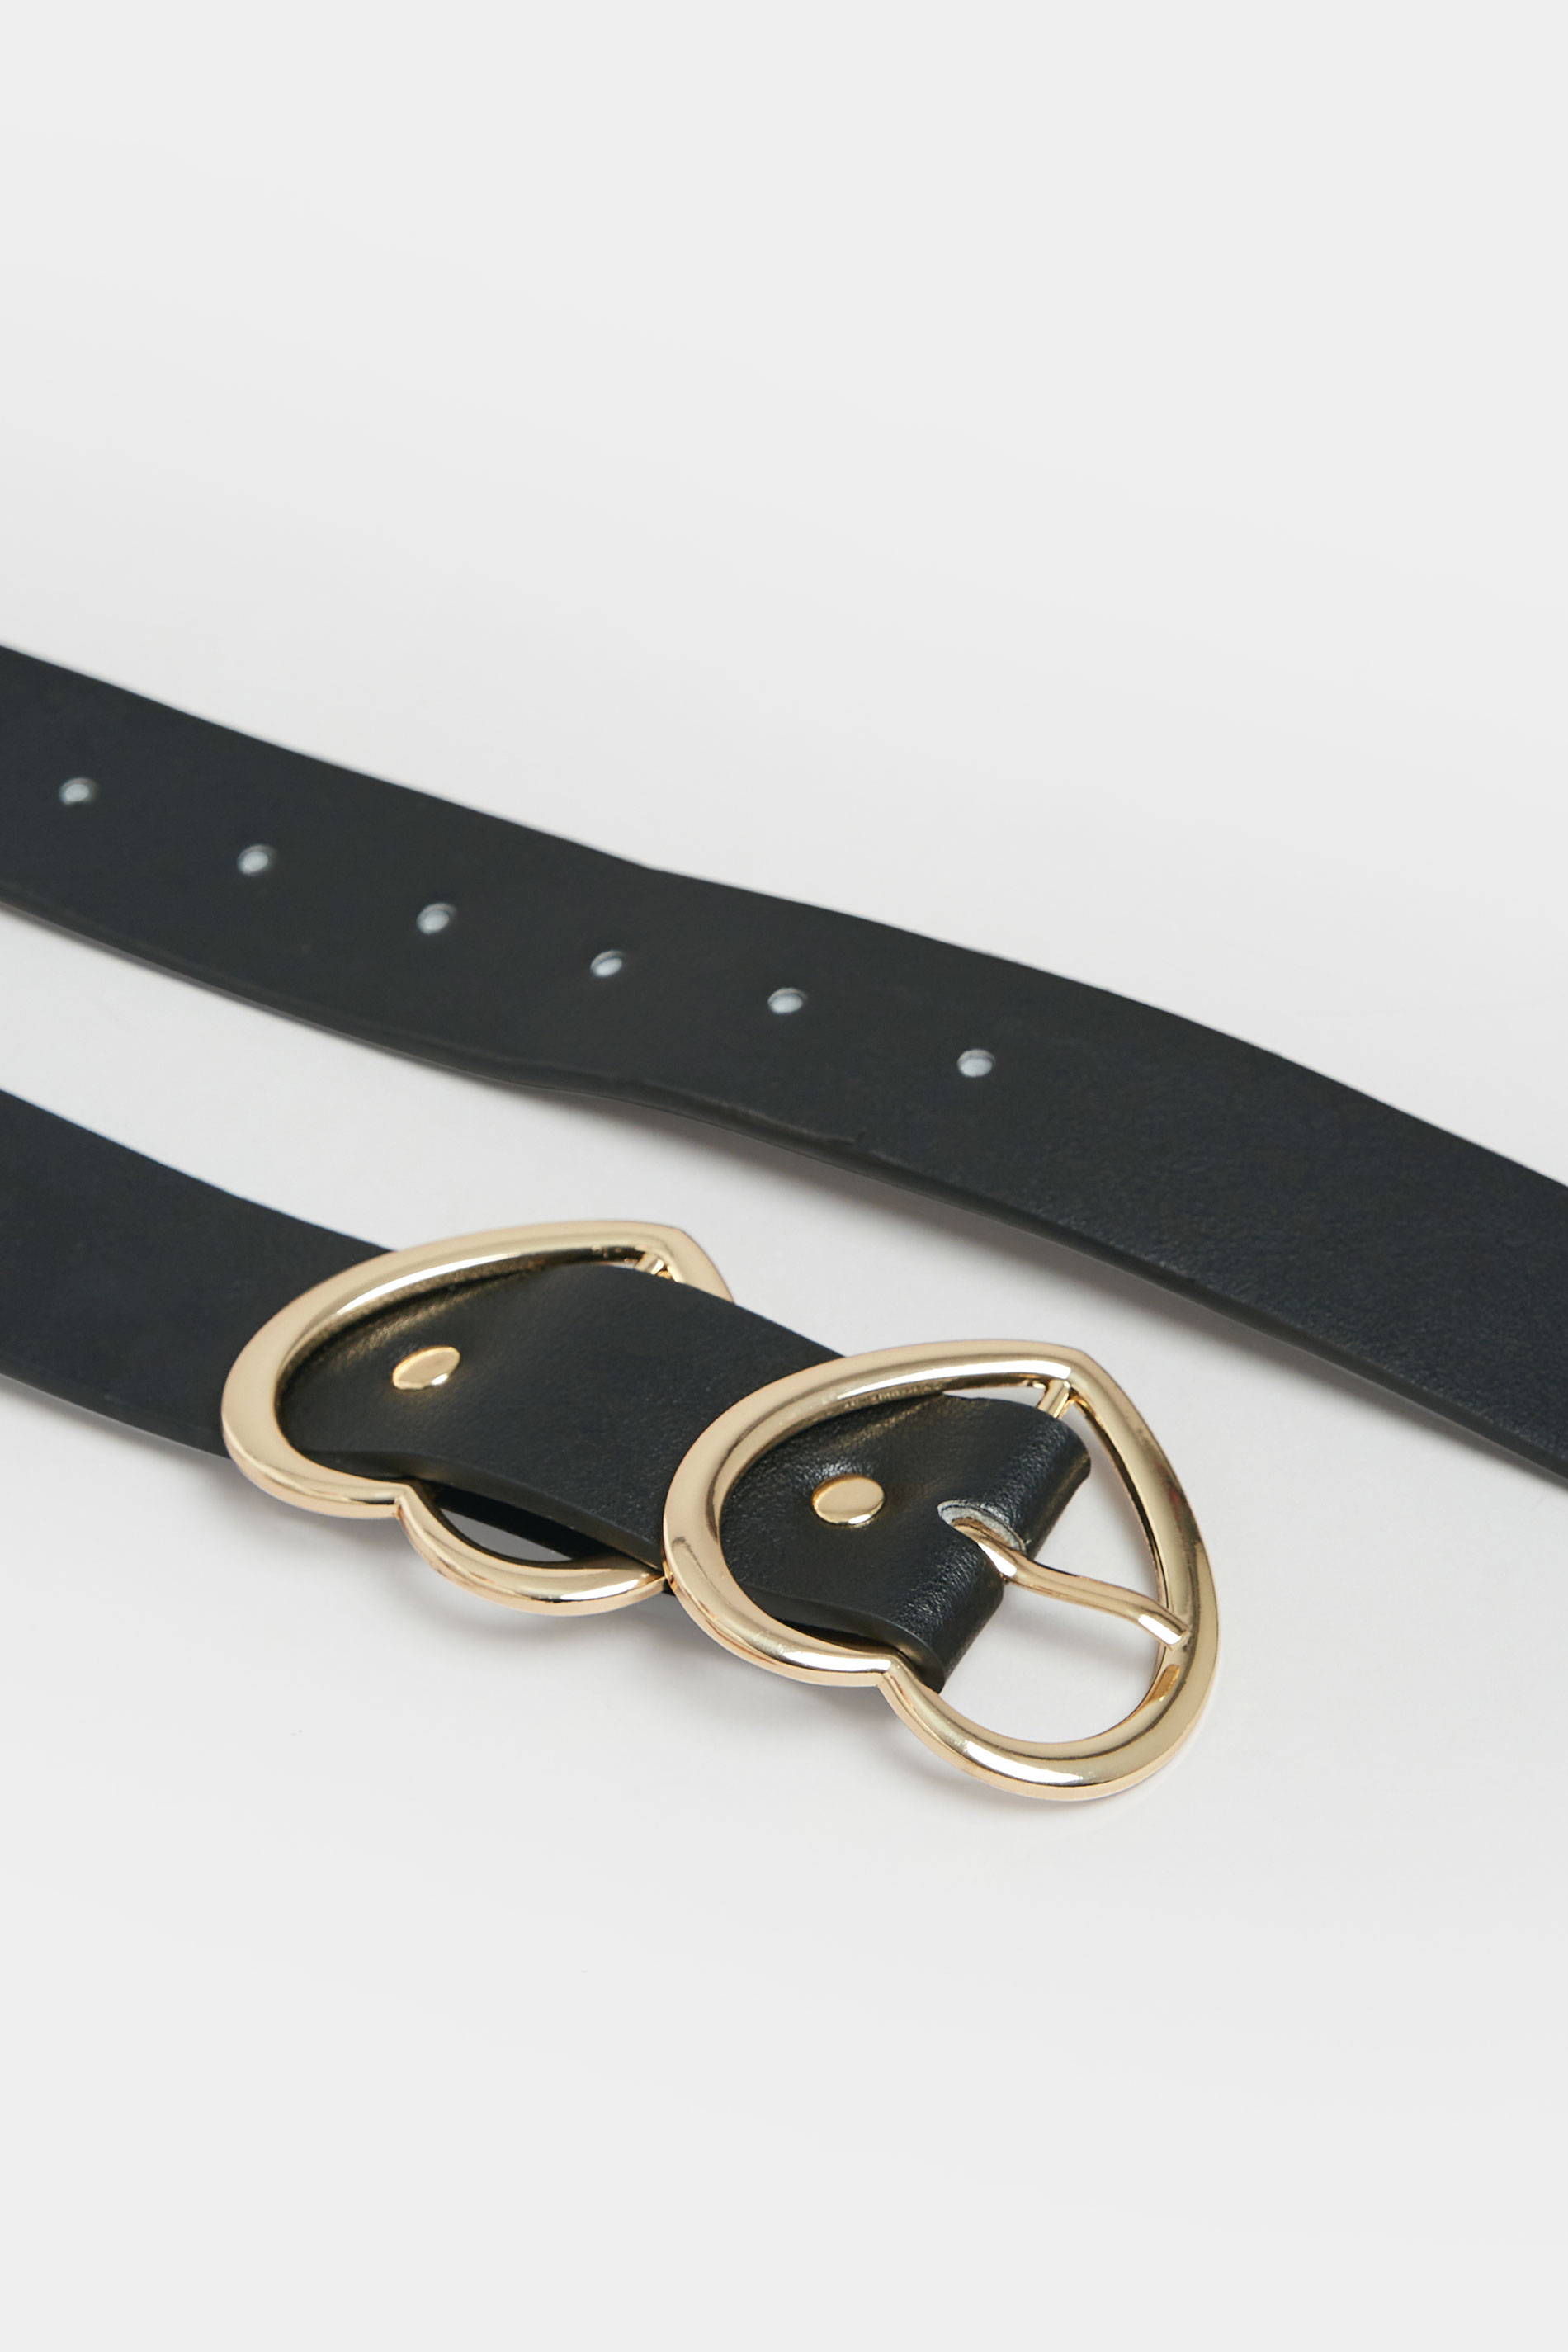 Black & Gold Double Heart Belt | Yours Clothing 3